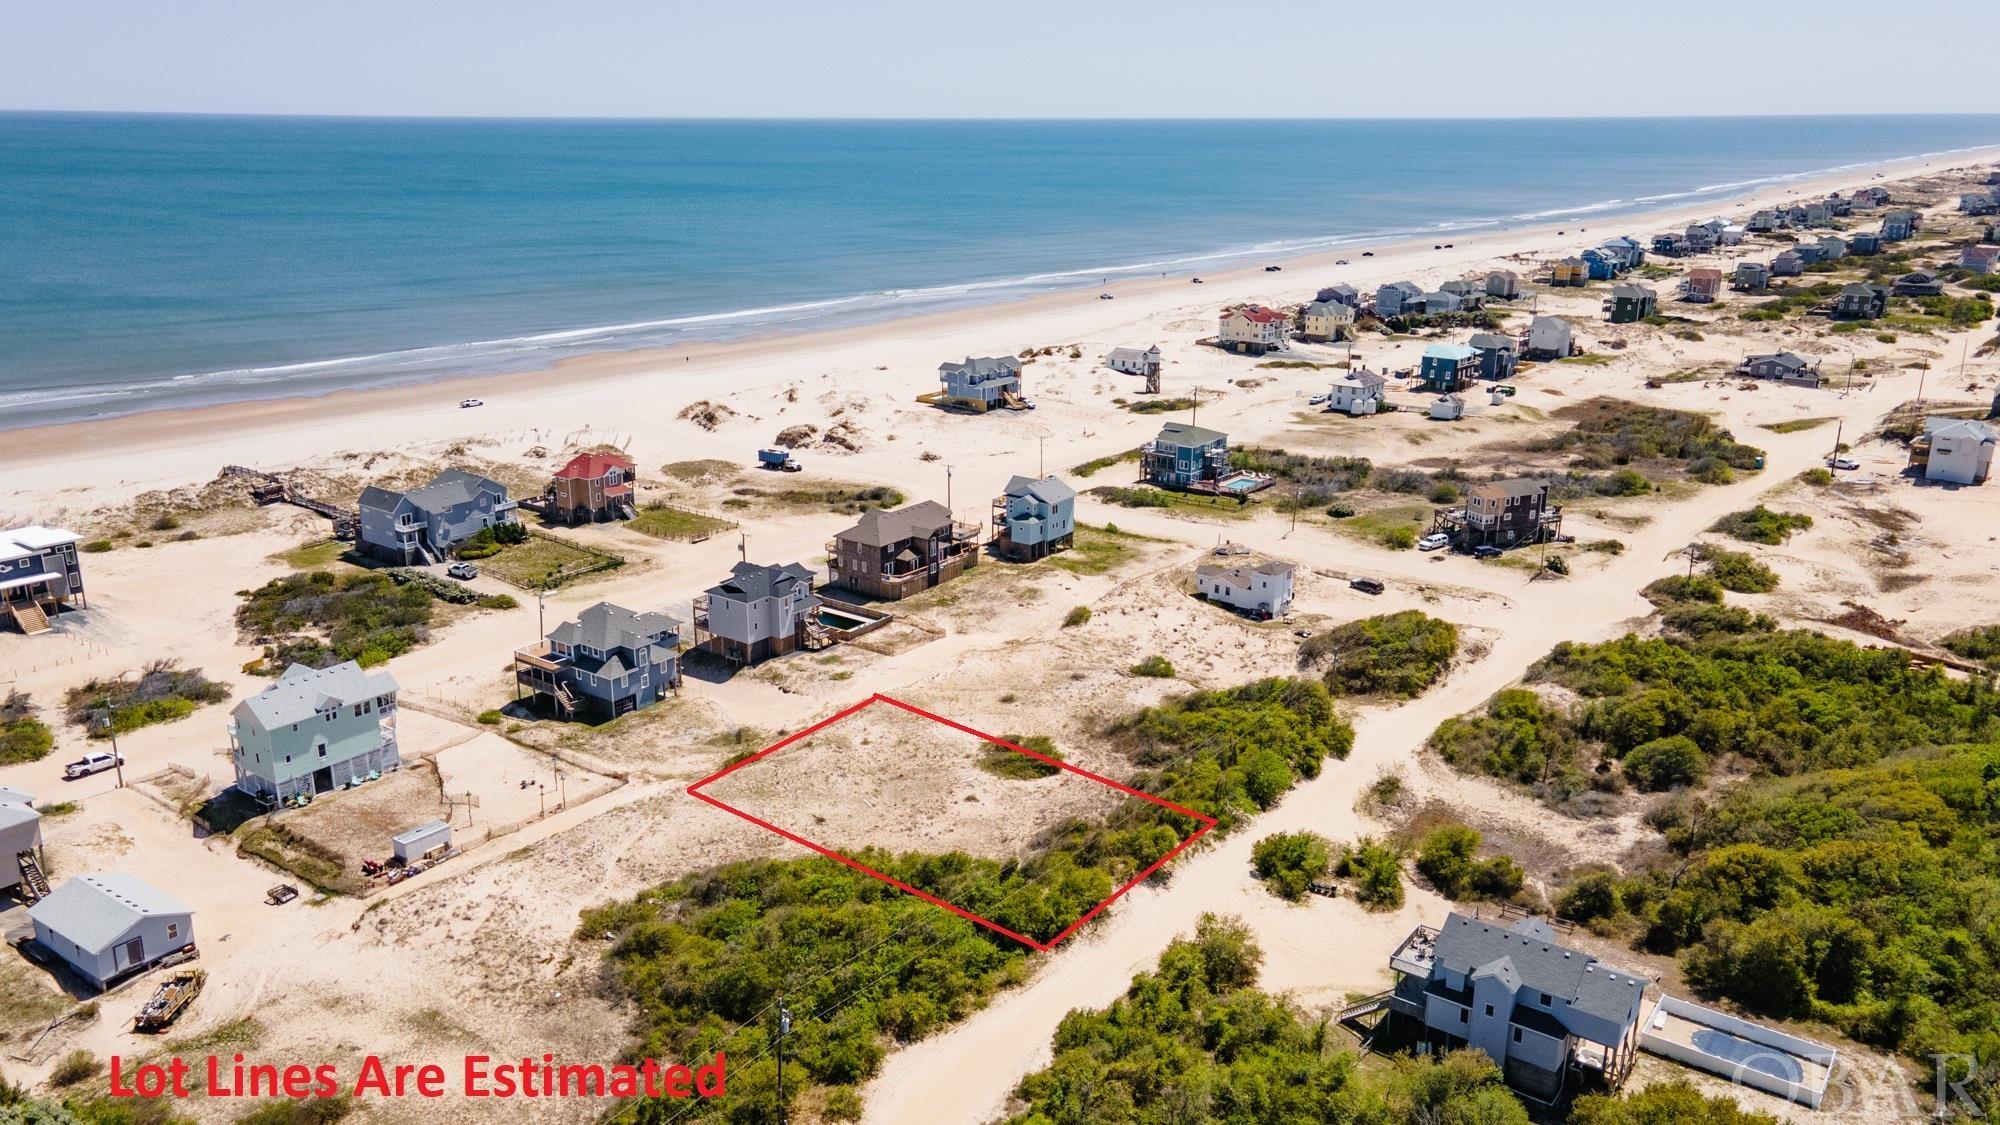 High elevation lot close to the beach!  The property is located on the third row back from ocean.  The access to the beach is close by, only three lots to the south.  While standing on ground level, the lot has peaks of ocean views.  A future home should have amazing views from the 2nd or 3rd level.  The property sits within the lower risk, flood X zone.  An excellent choice for a future beach house in the Corolla 4x4 area, where the wild horses roam.   Land Survey and soil evaluation were completed in 2019. Documents are available to view for those interested in the property.  Please ask for more details!